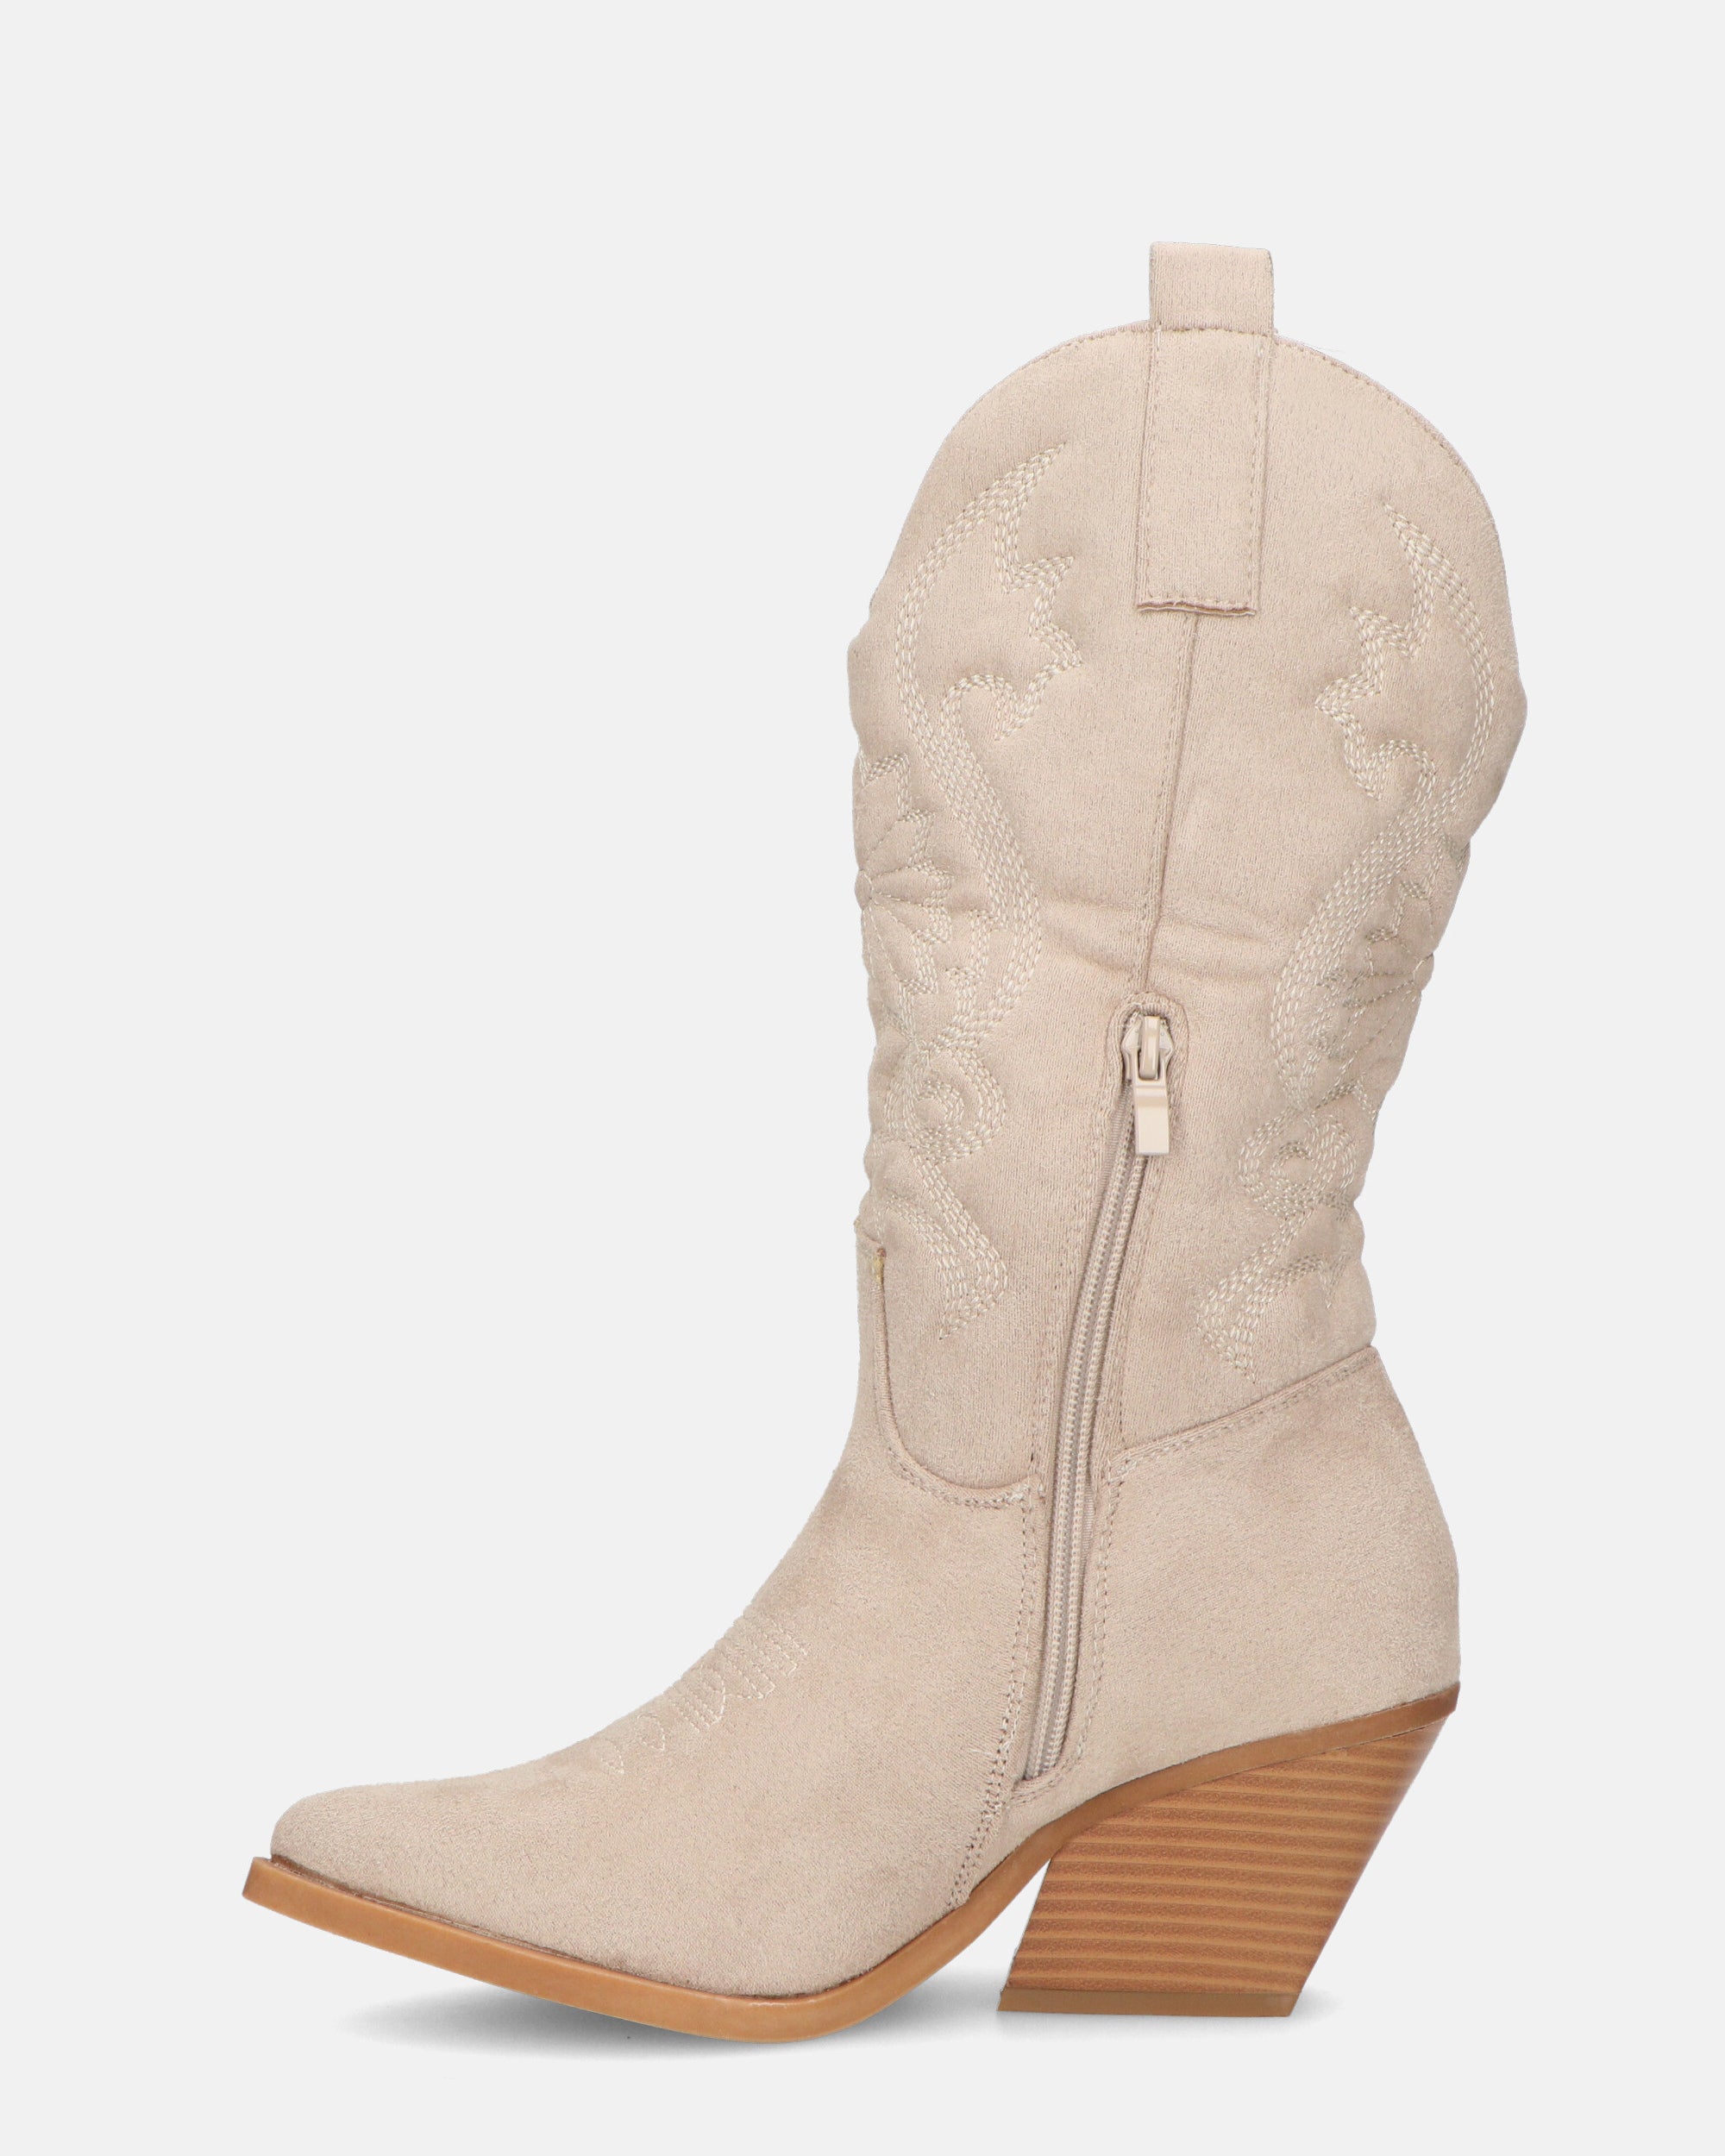 VITA - light beige suede camperos with embroidery and zip